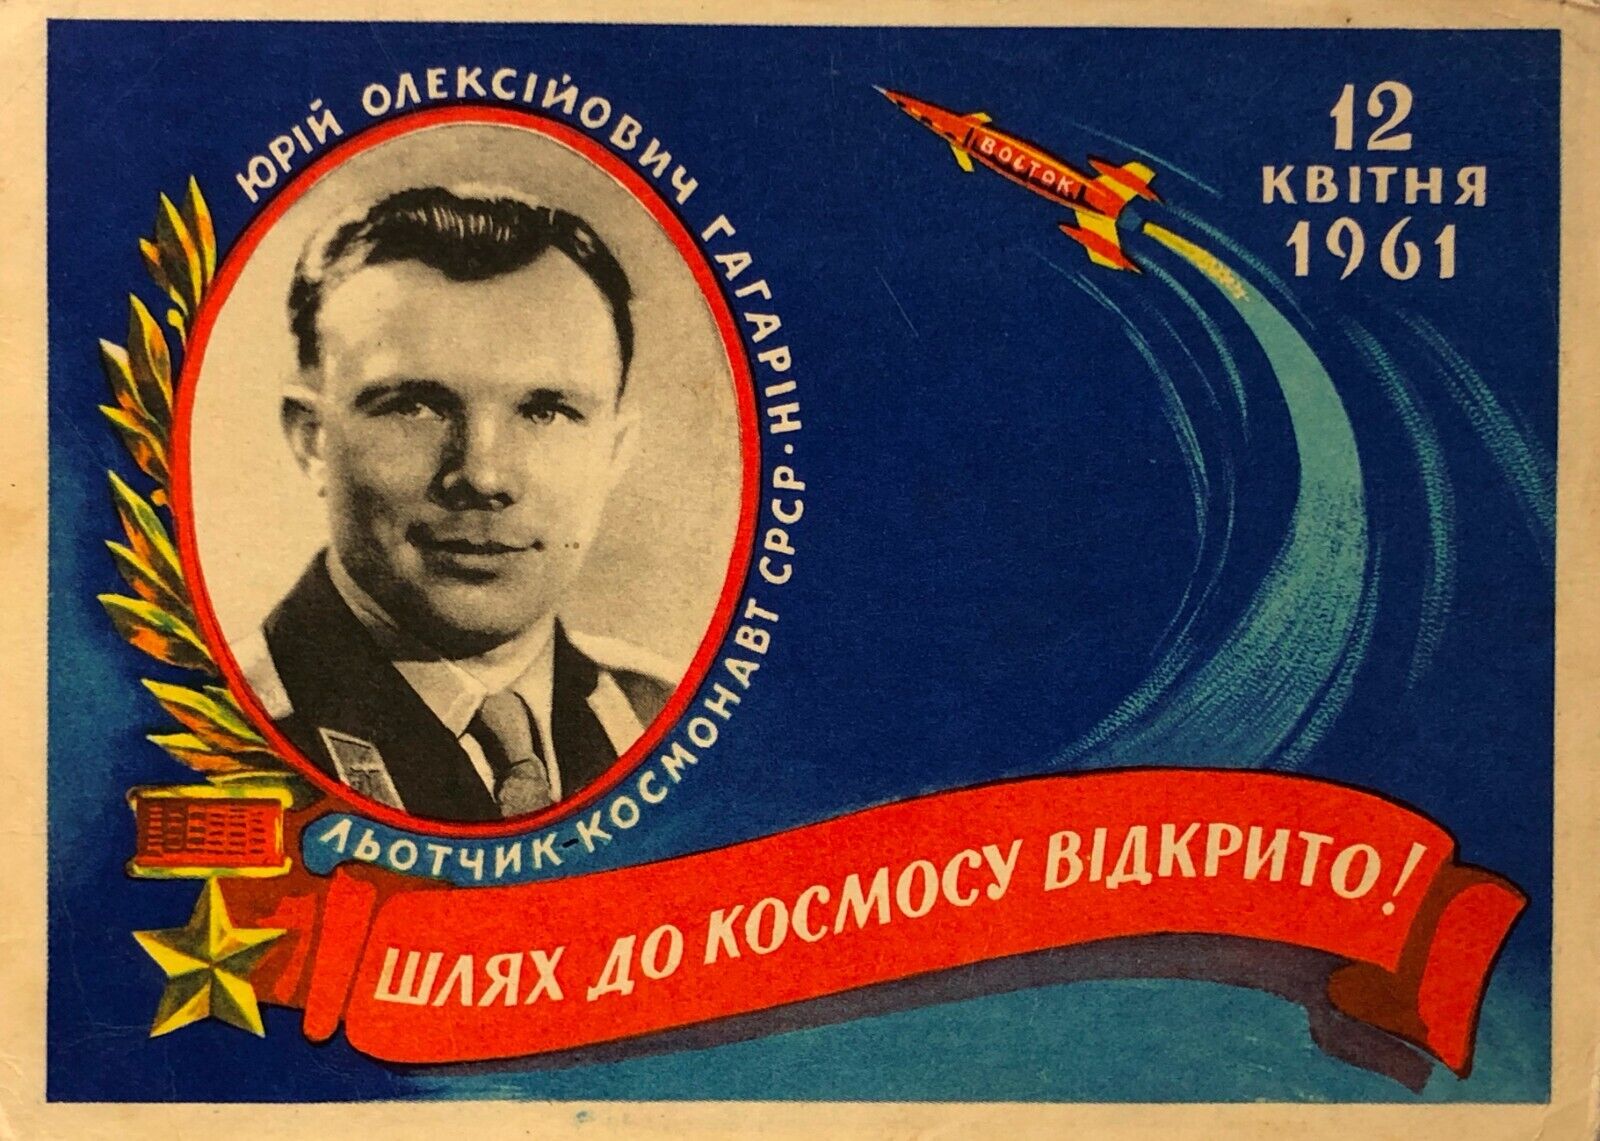 1961 Vintage Postcard with Gagarin and Rocket of the USSR Propaganda Card